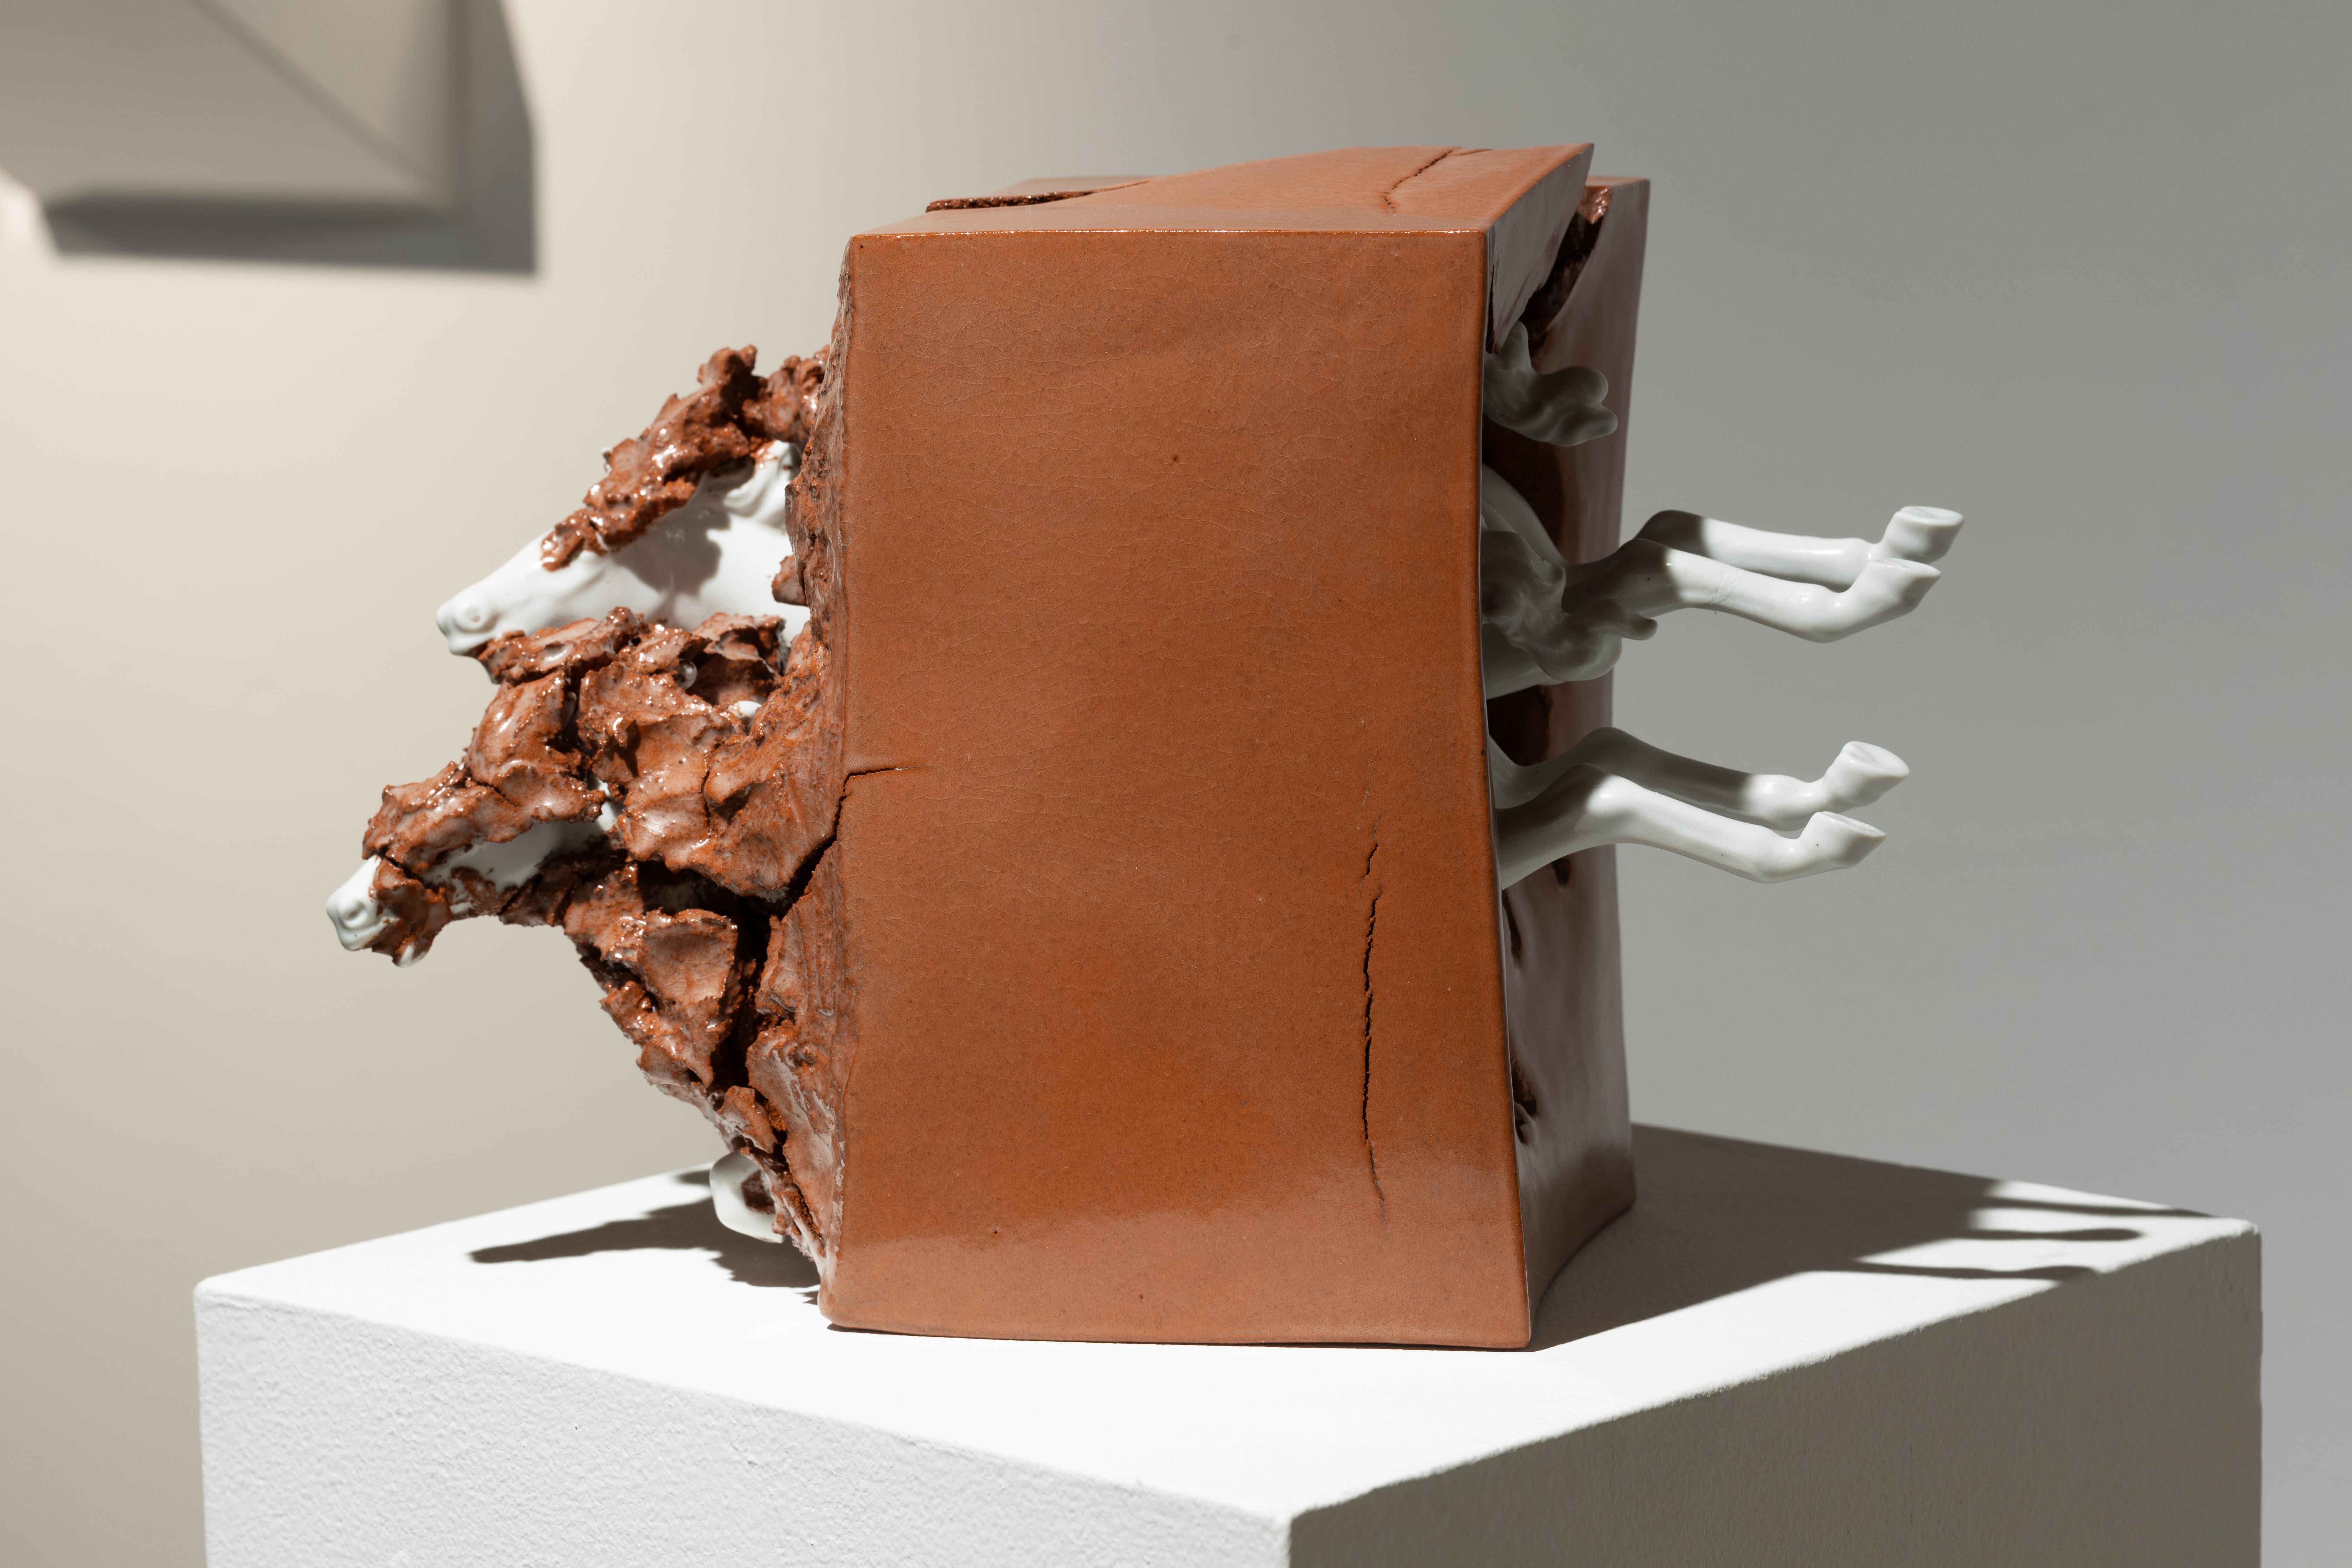 Dana Widawski’s ceramic works can be compared to the form of wild thinking. She transcends genre boundaries and one-sided classifications by repeatedly creating abrupt and unforeseen combinations. Her works undermine borderlines between art and